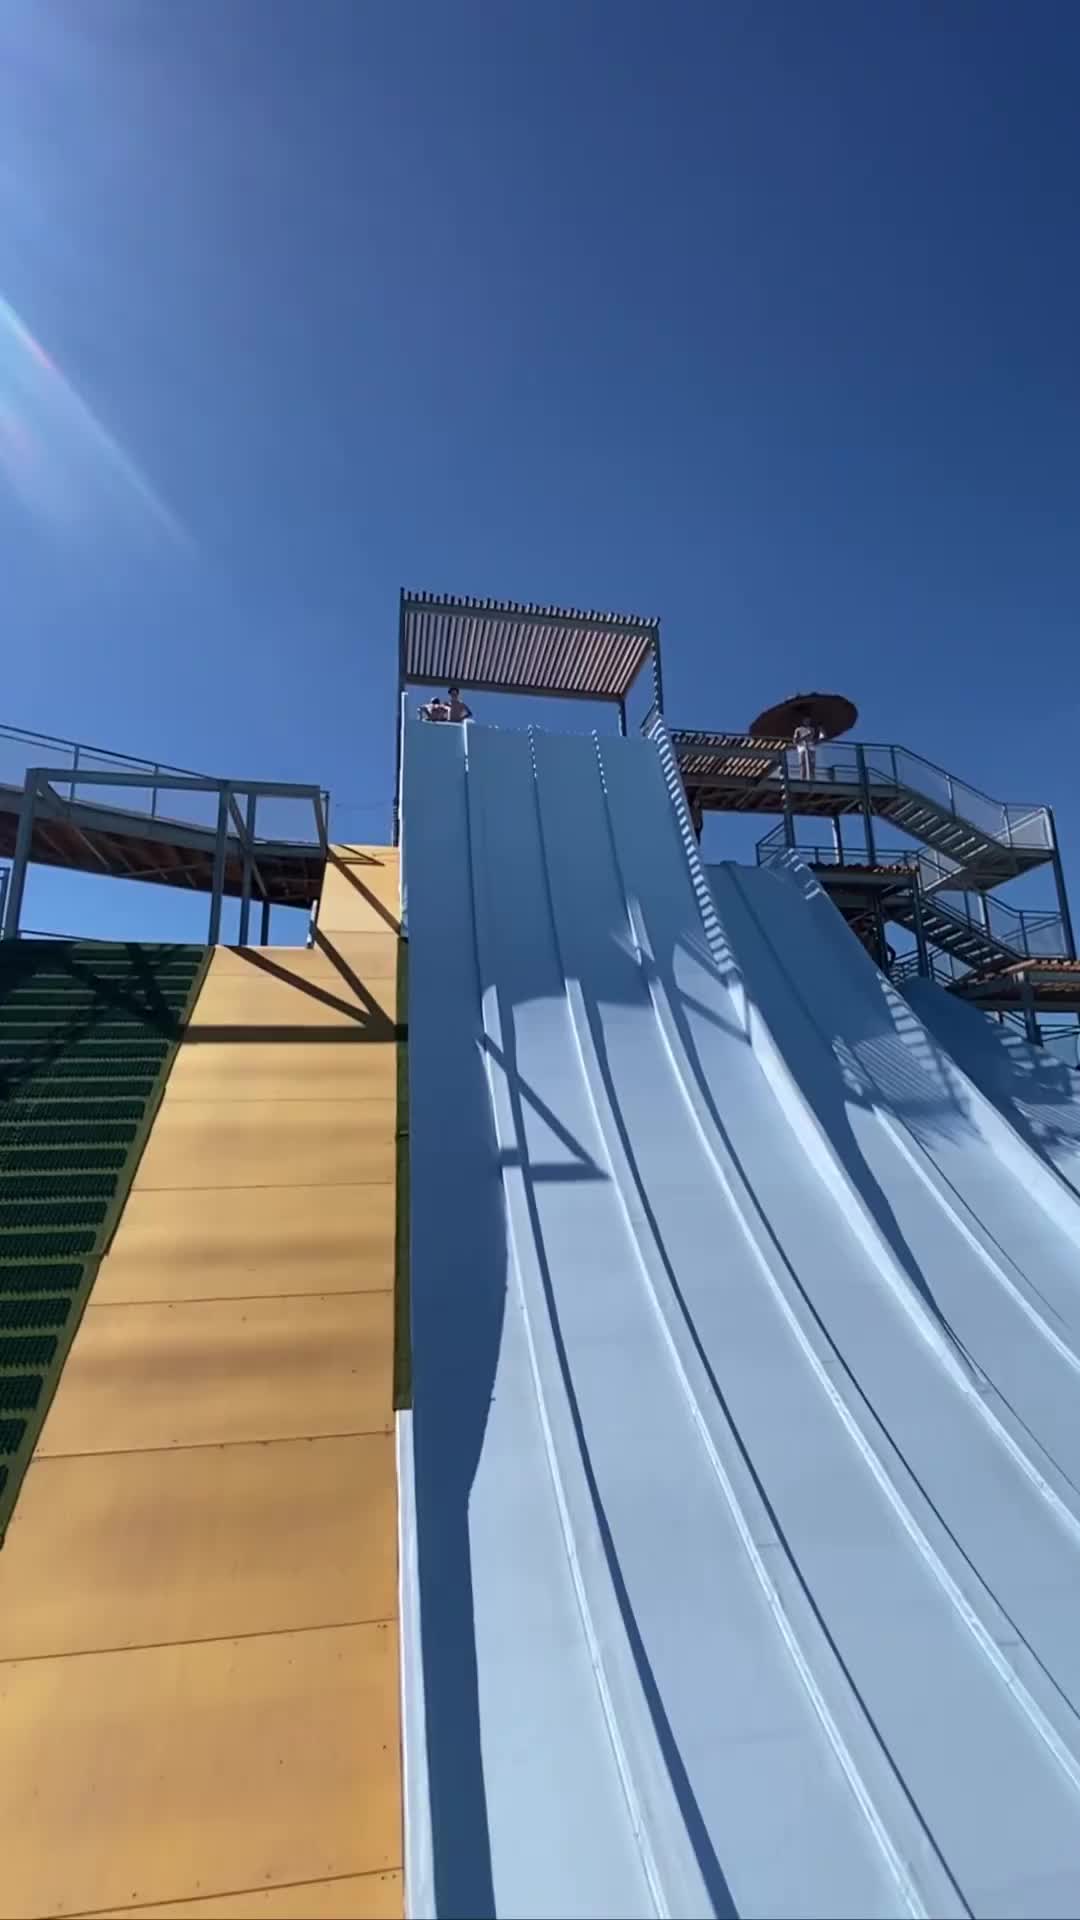 Thrilling Water Jump by Pro Athlete at Frenzy Waterpark